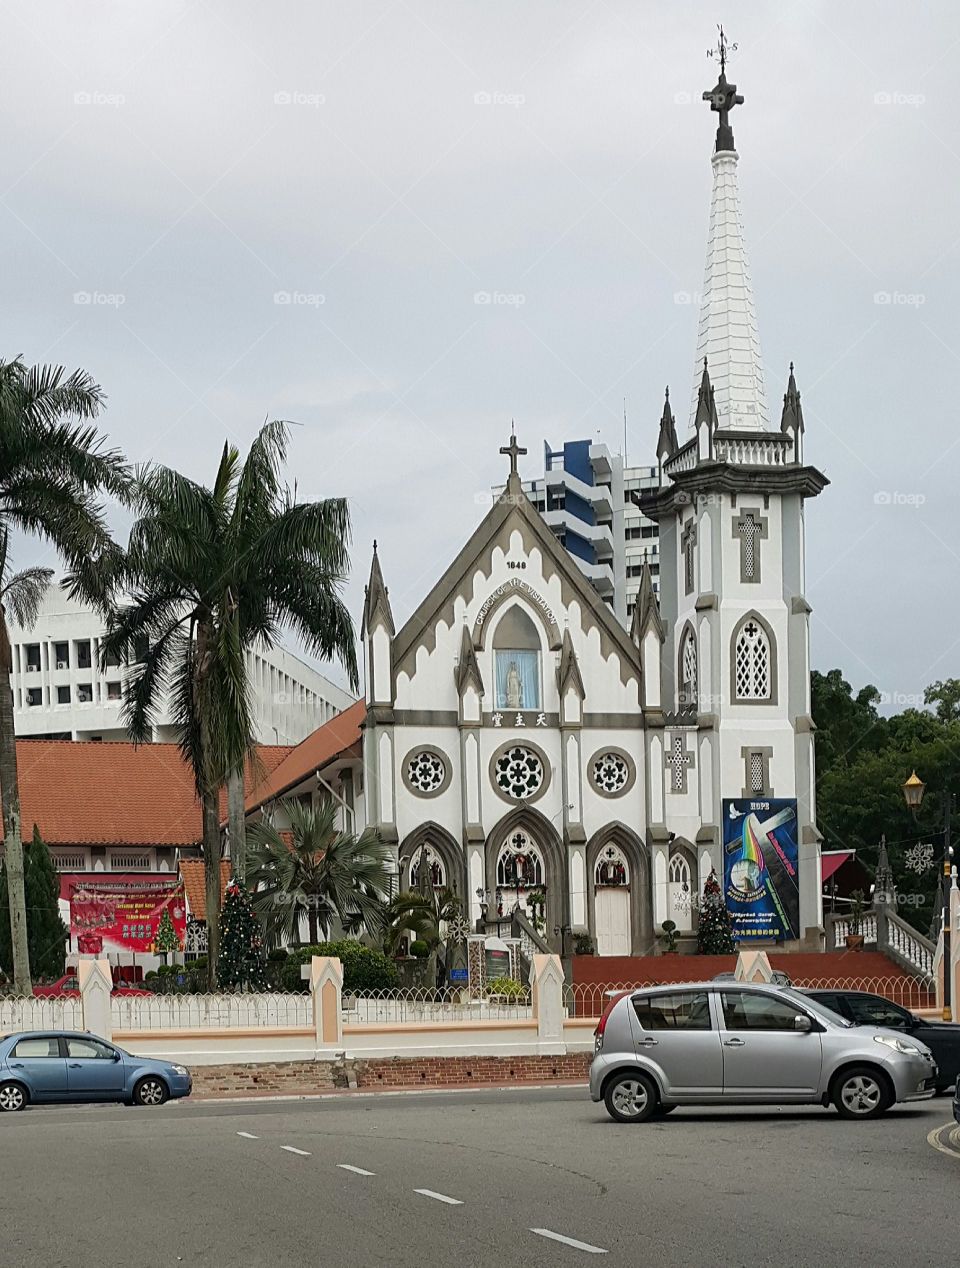 Church of Visitation.  It's the biggest Catholic Church in small town Seremban, Malaysia which was built by French missionaries in the late 19th century. The picture depicts the church at it gets ready for Xmas 2017.